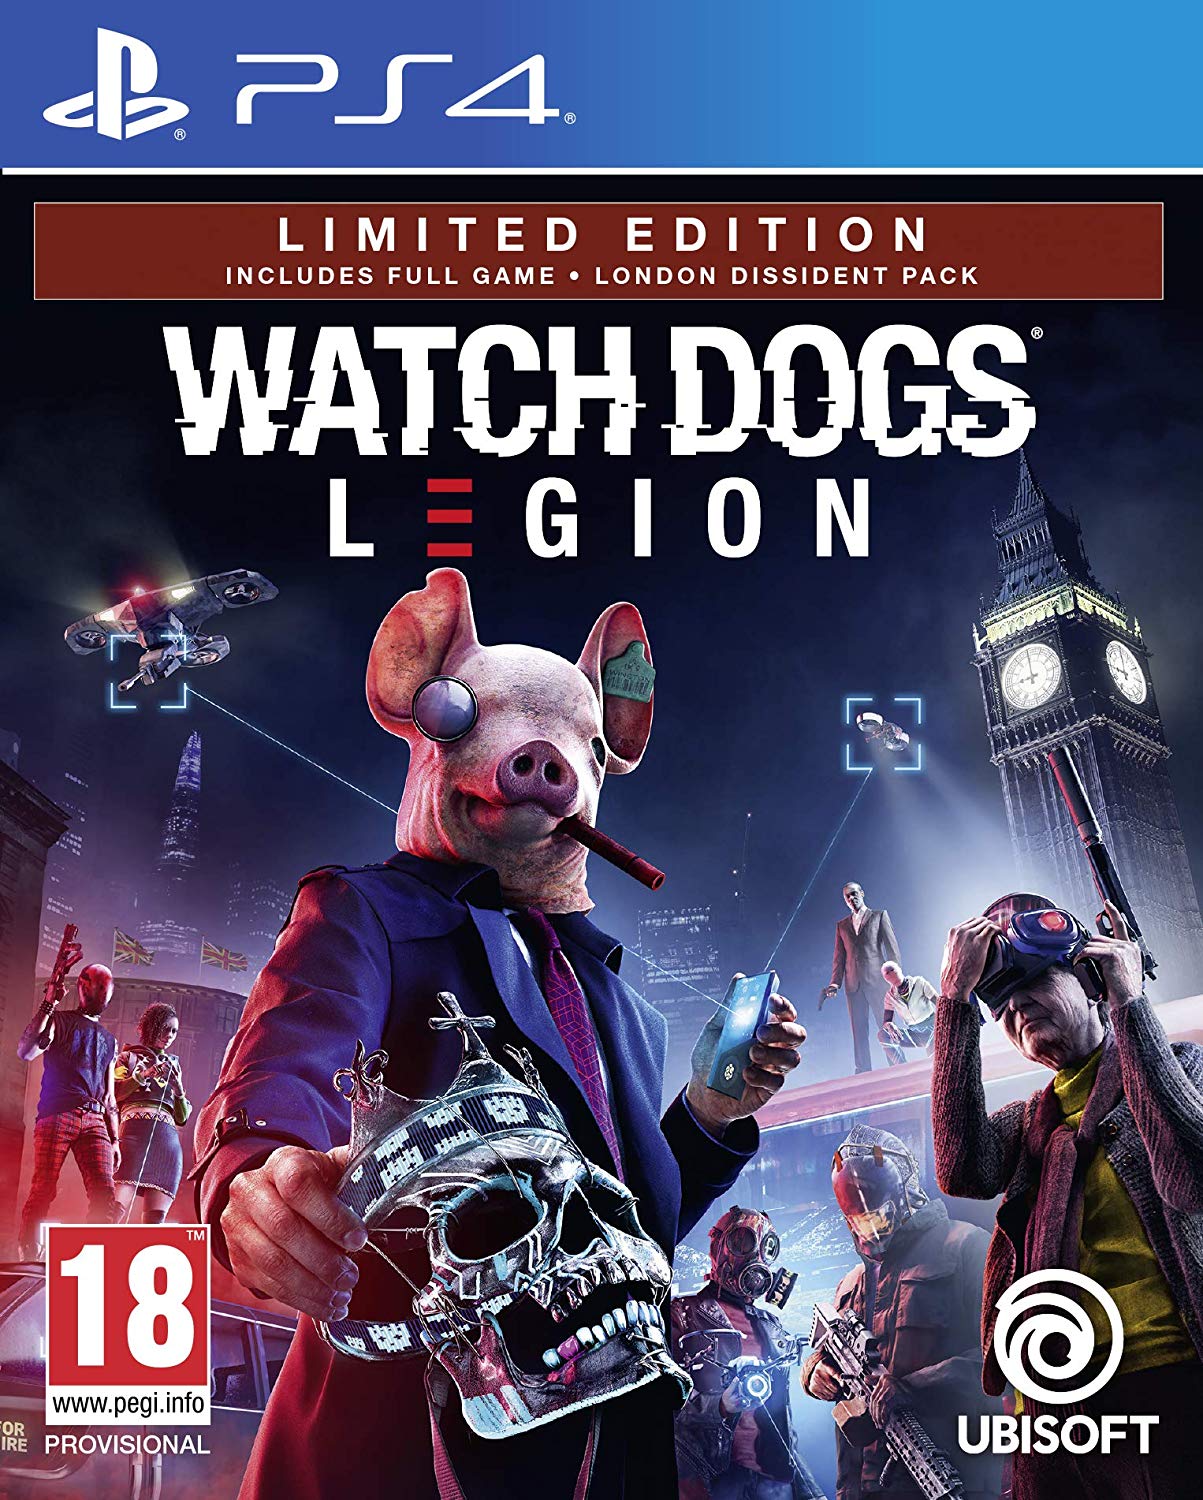 Watch dogs legion cover 4 2